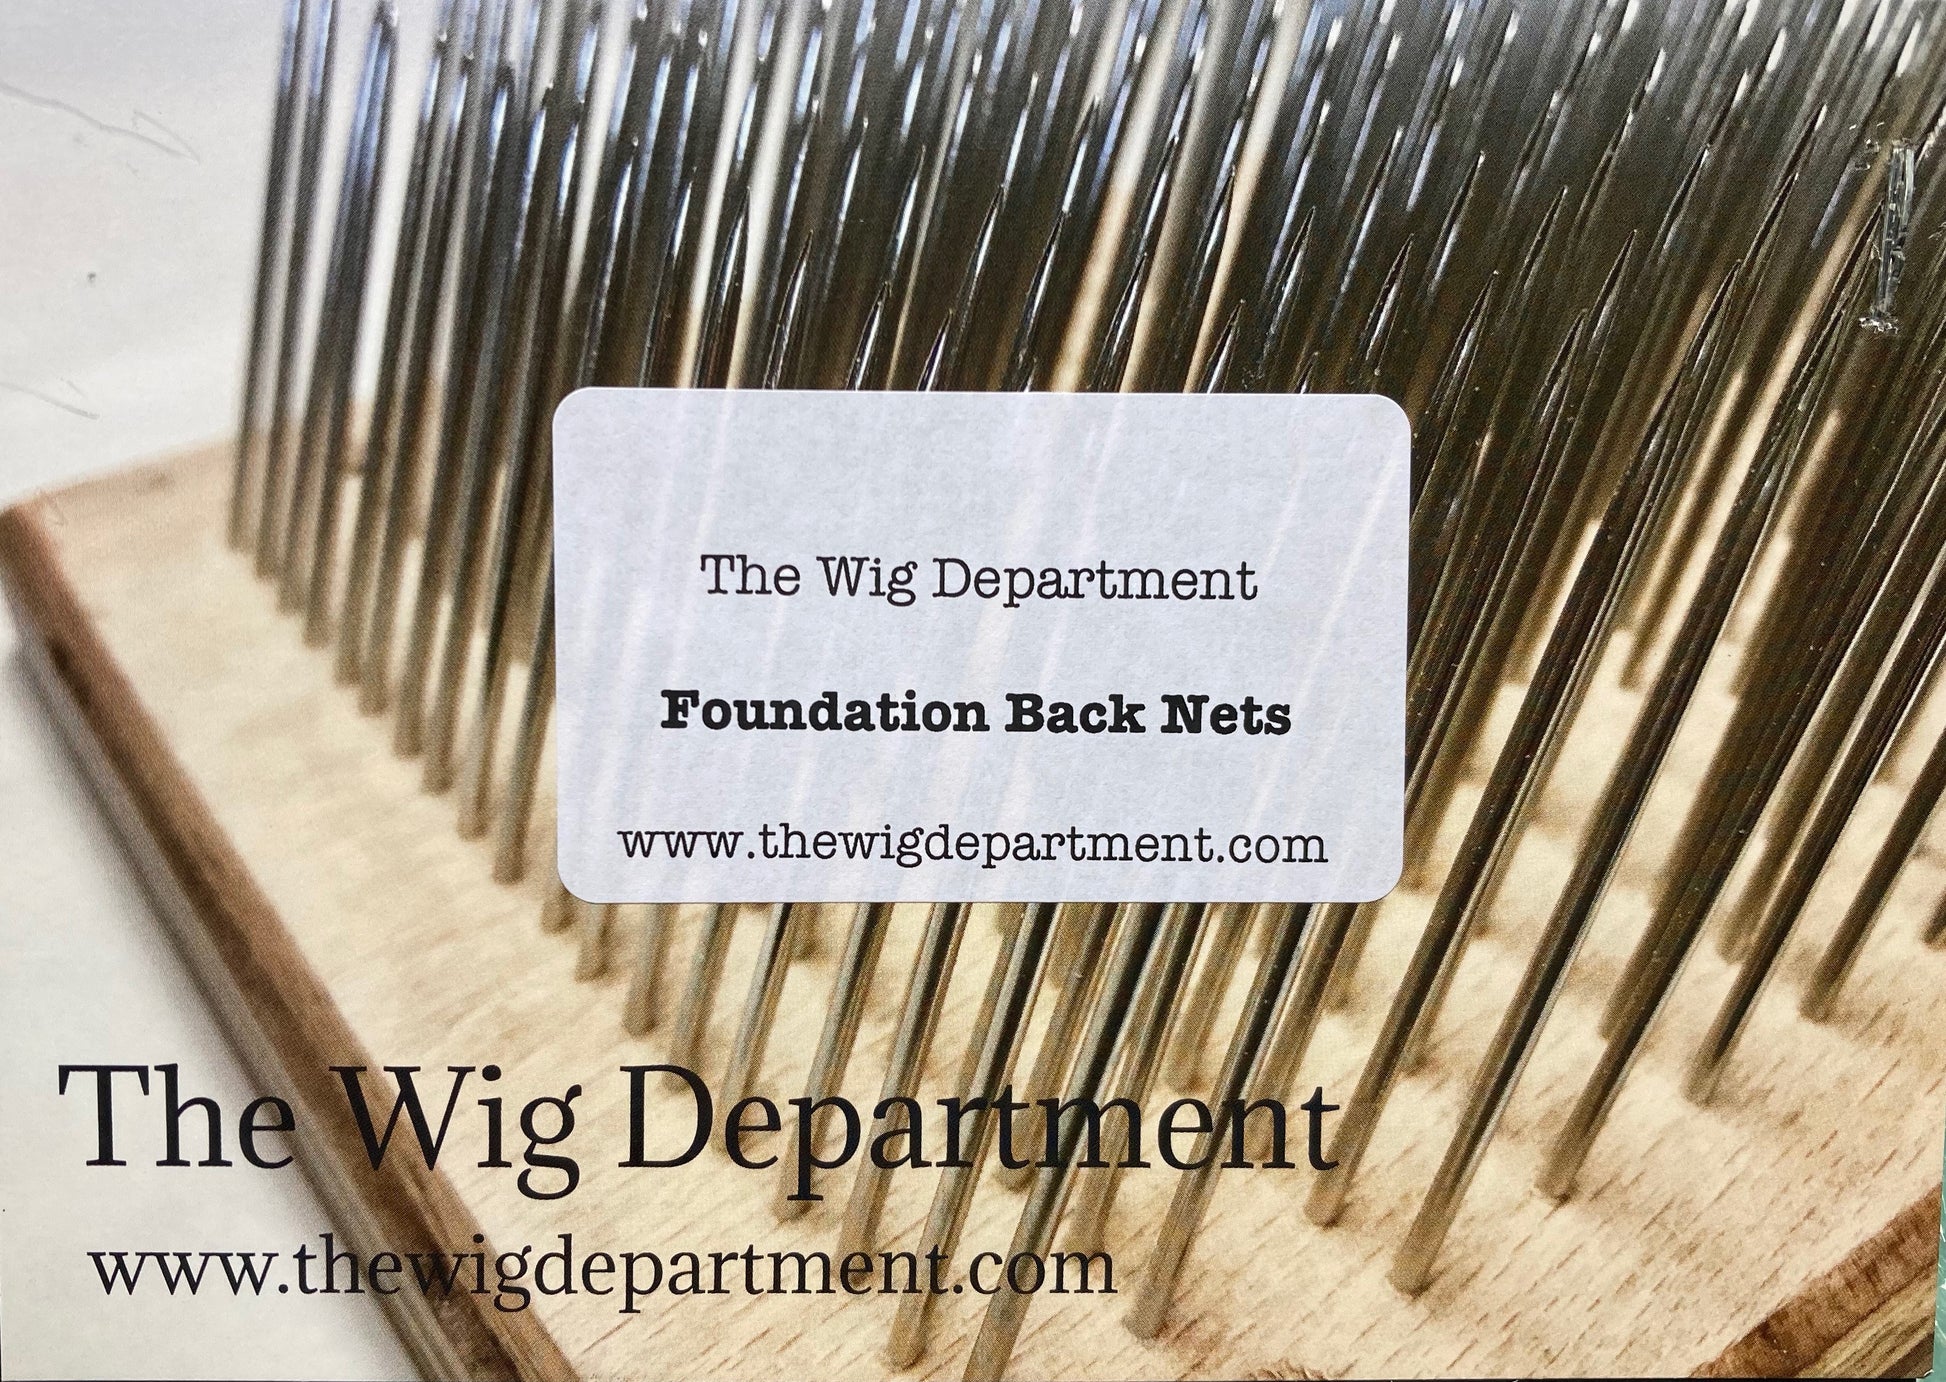 Wig Foundation net Samples - The Wig department